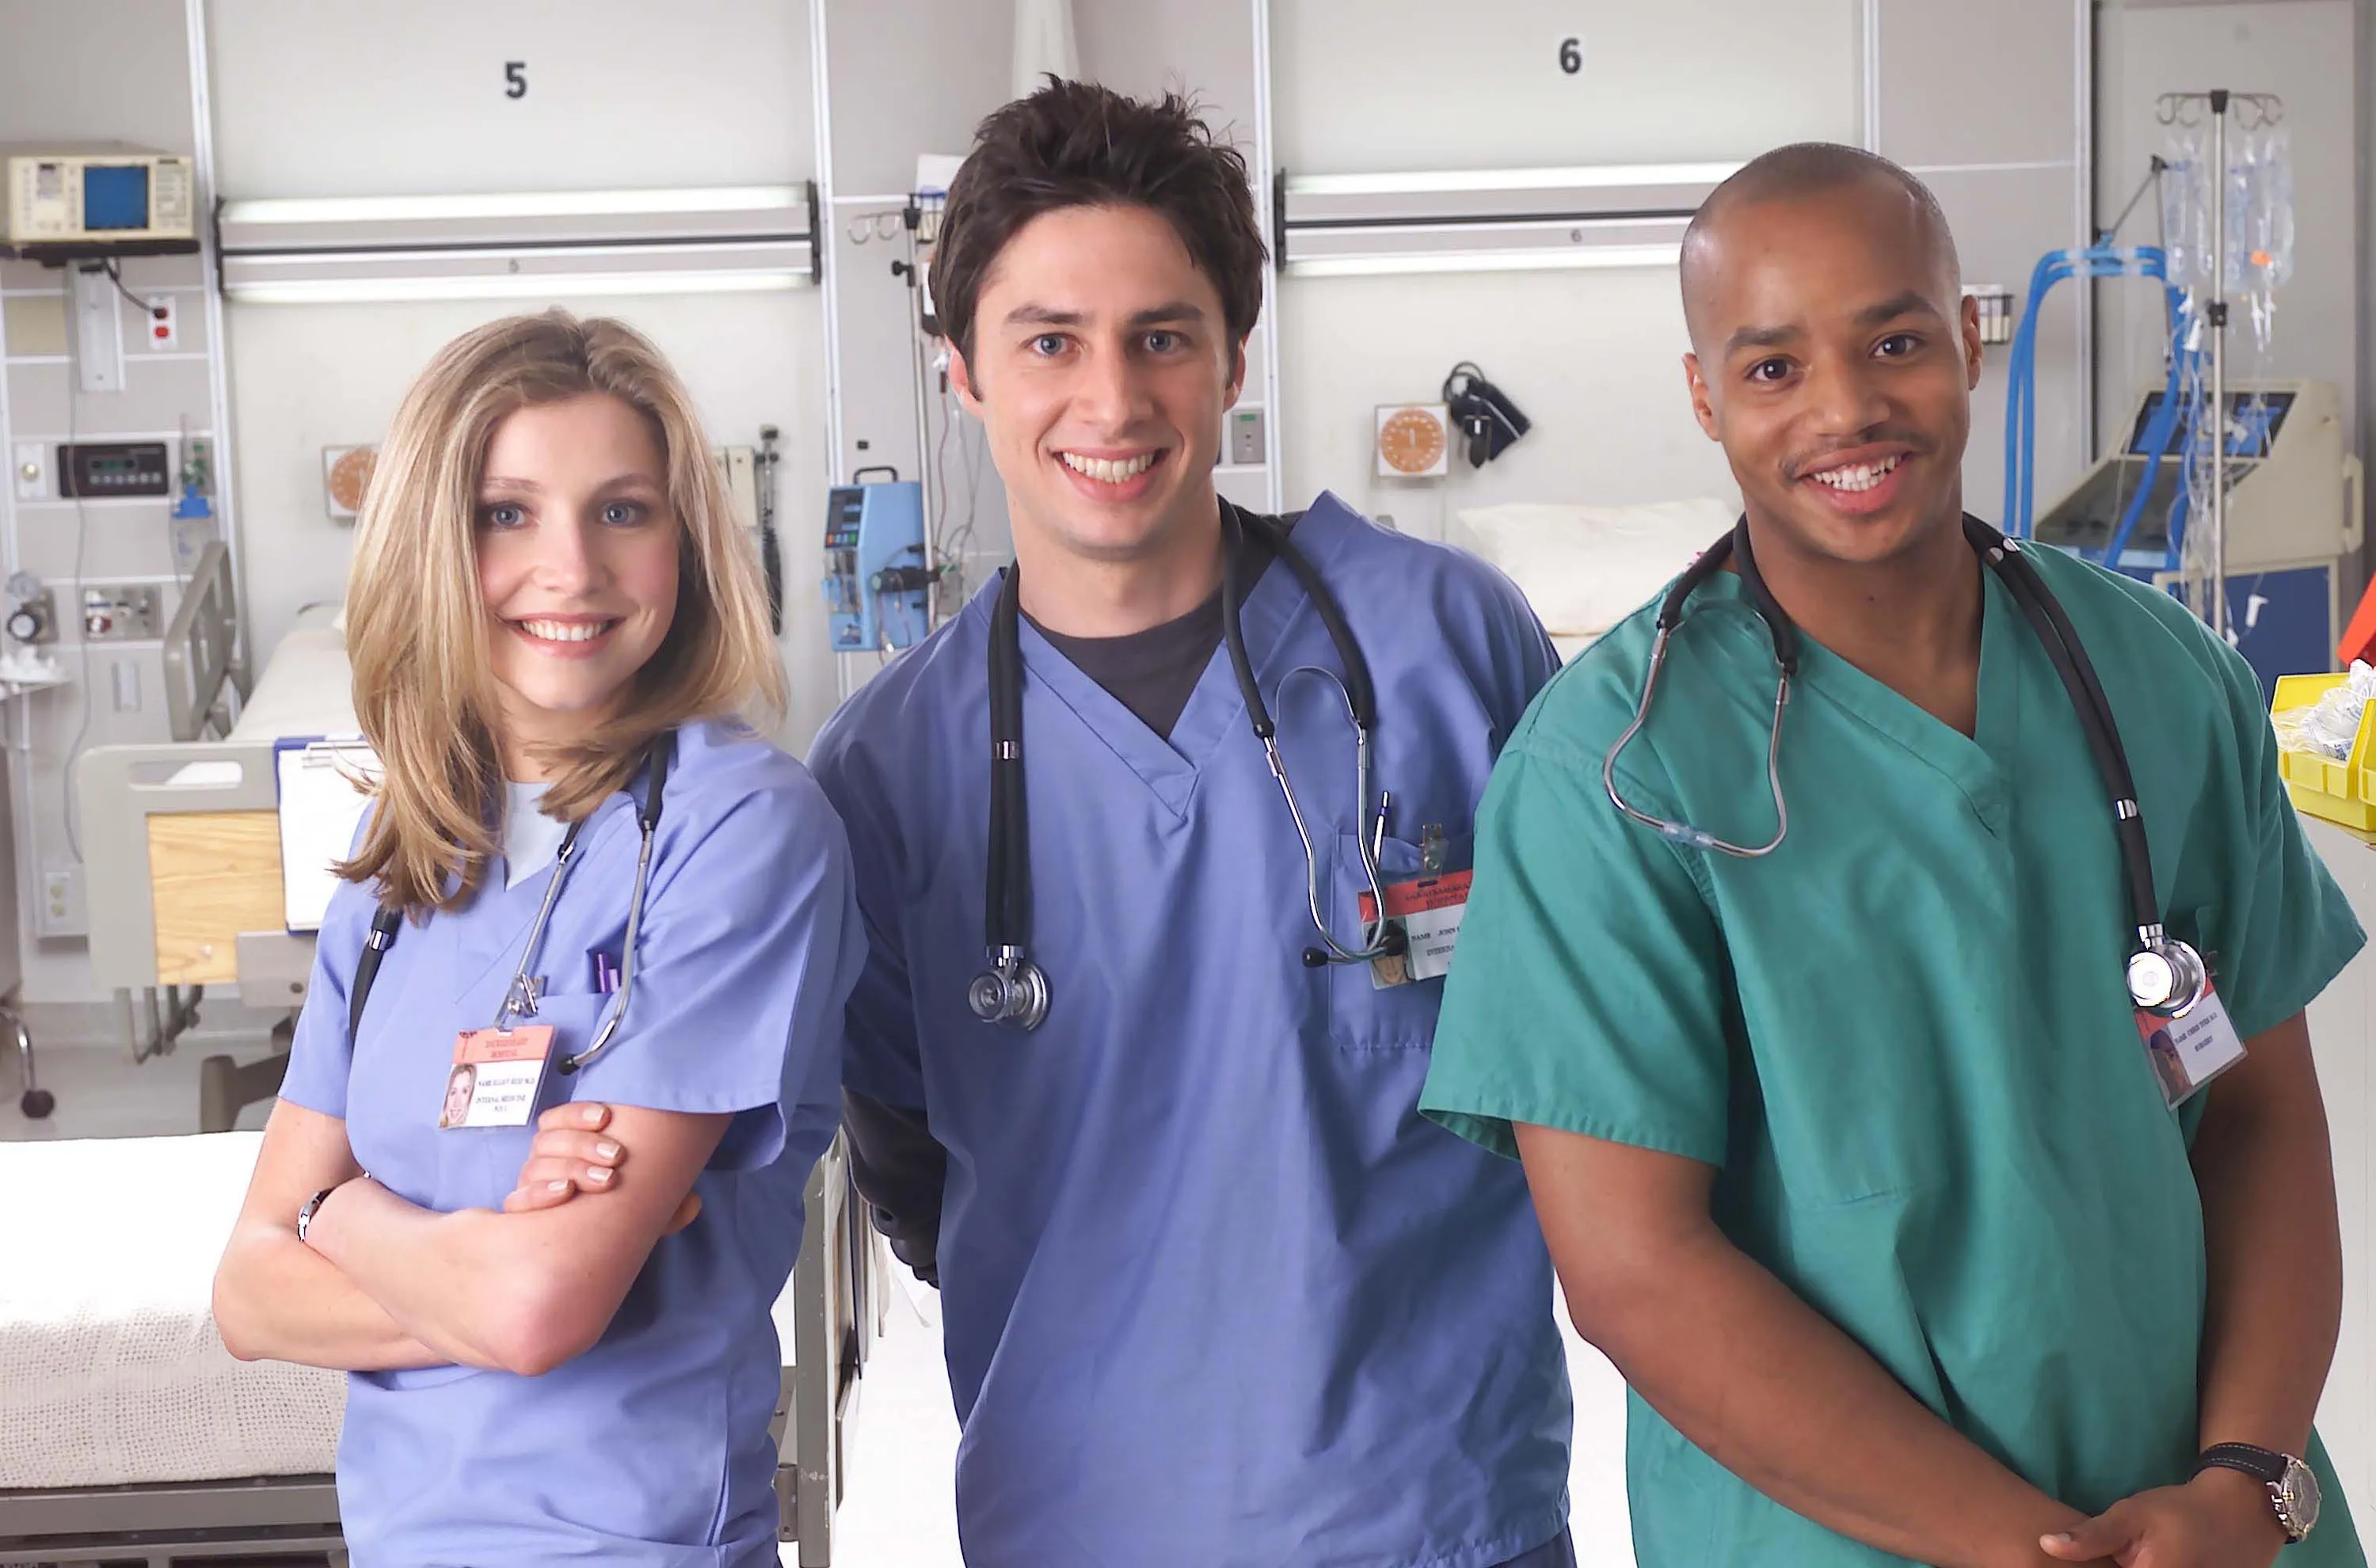 Cast of NBC TV Show "Scrubs", Actors Who Have Played Doctors On Television